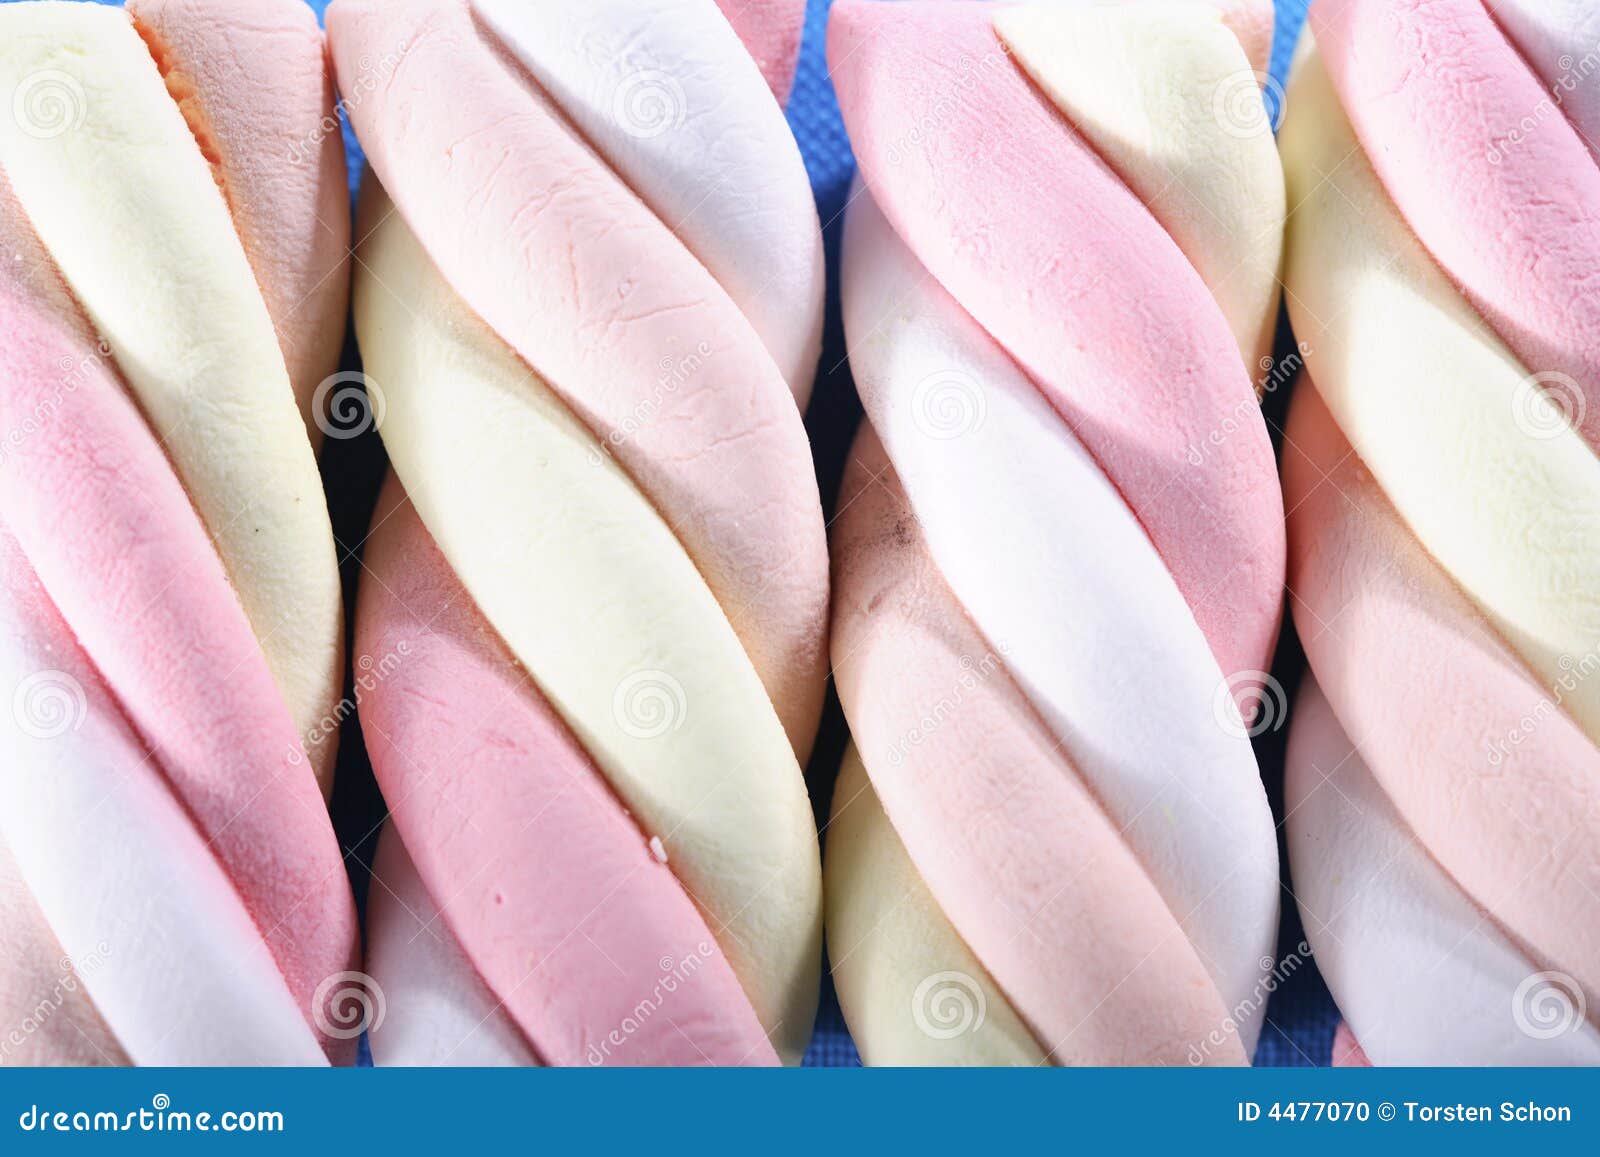 Marshmallows stock photo. Image of sweet, confection, peach - 4477070